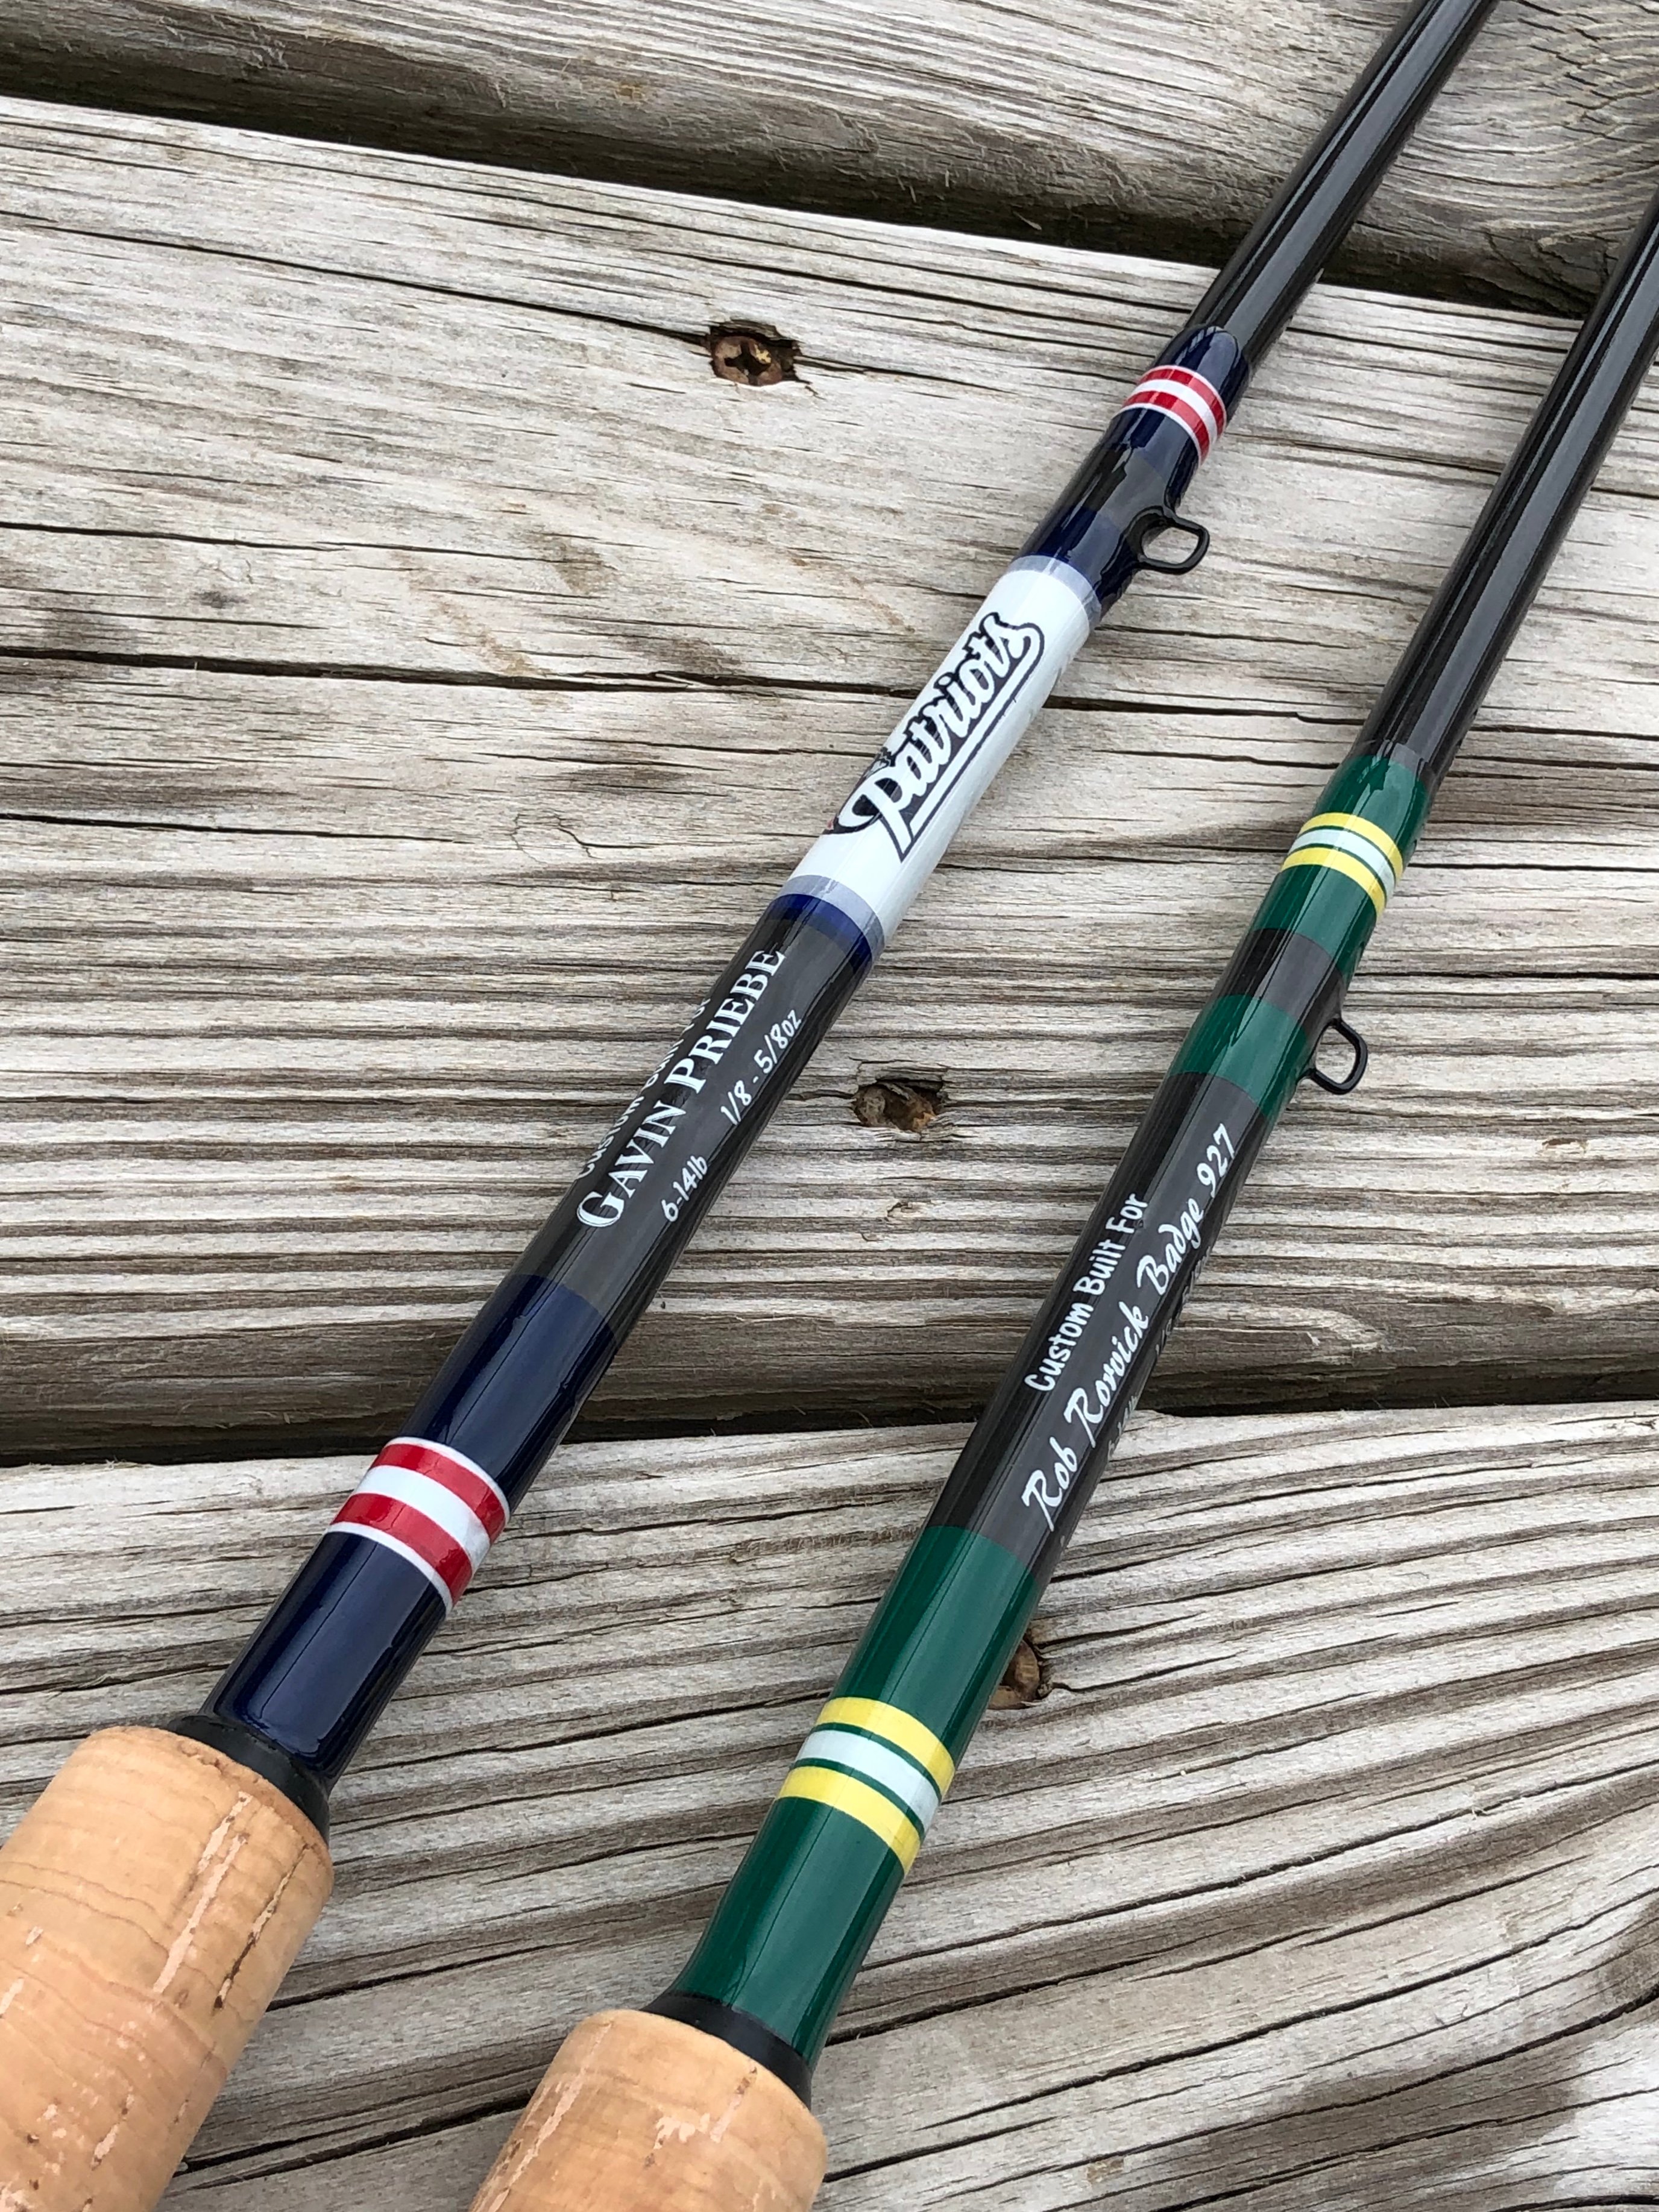 NFL Themed fishing rods - General Discussion Forum - General Discussion  Forum